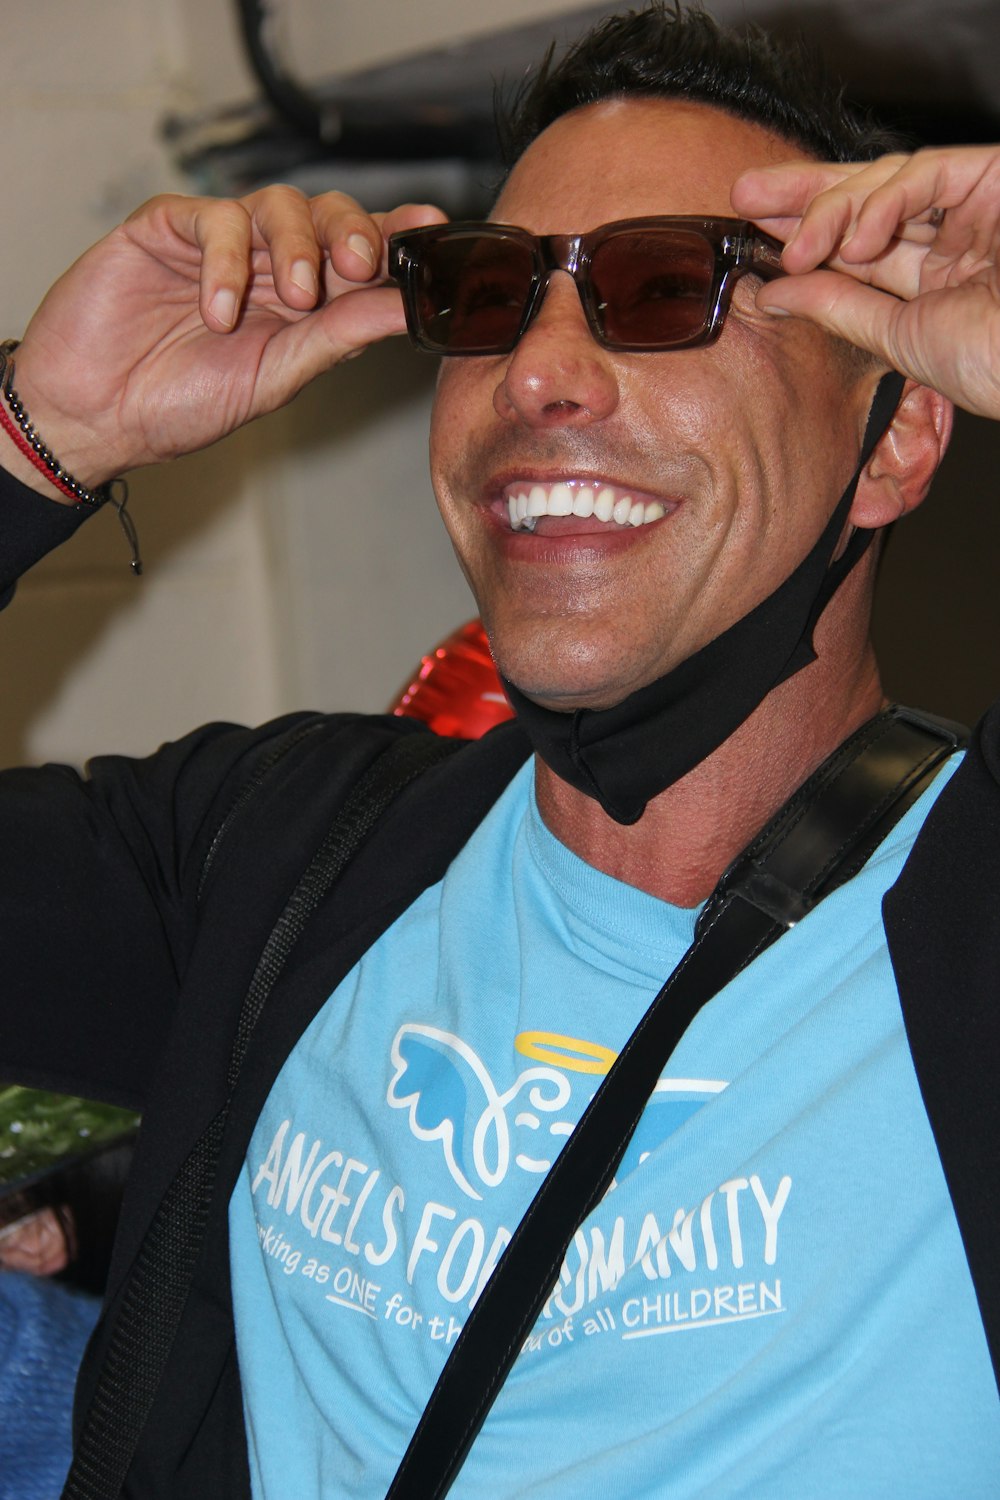 a man in a blue shirt is holding up his sunglasses